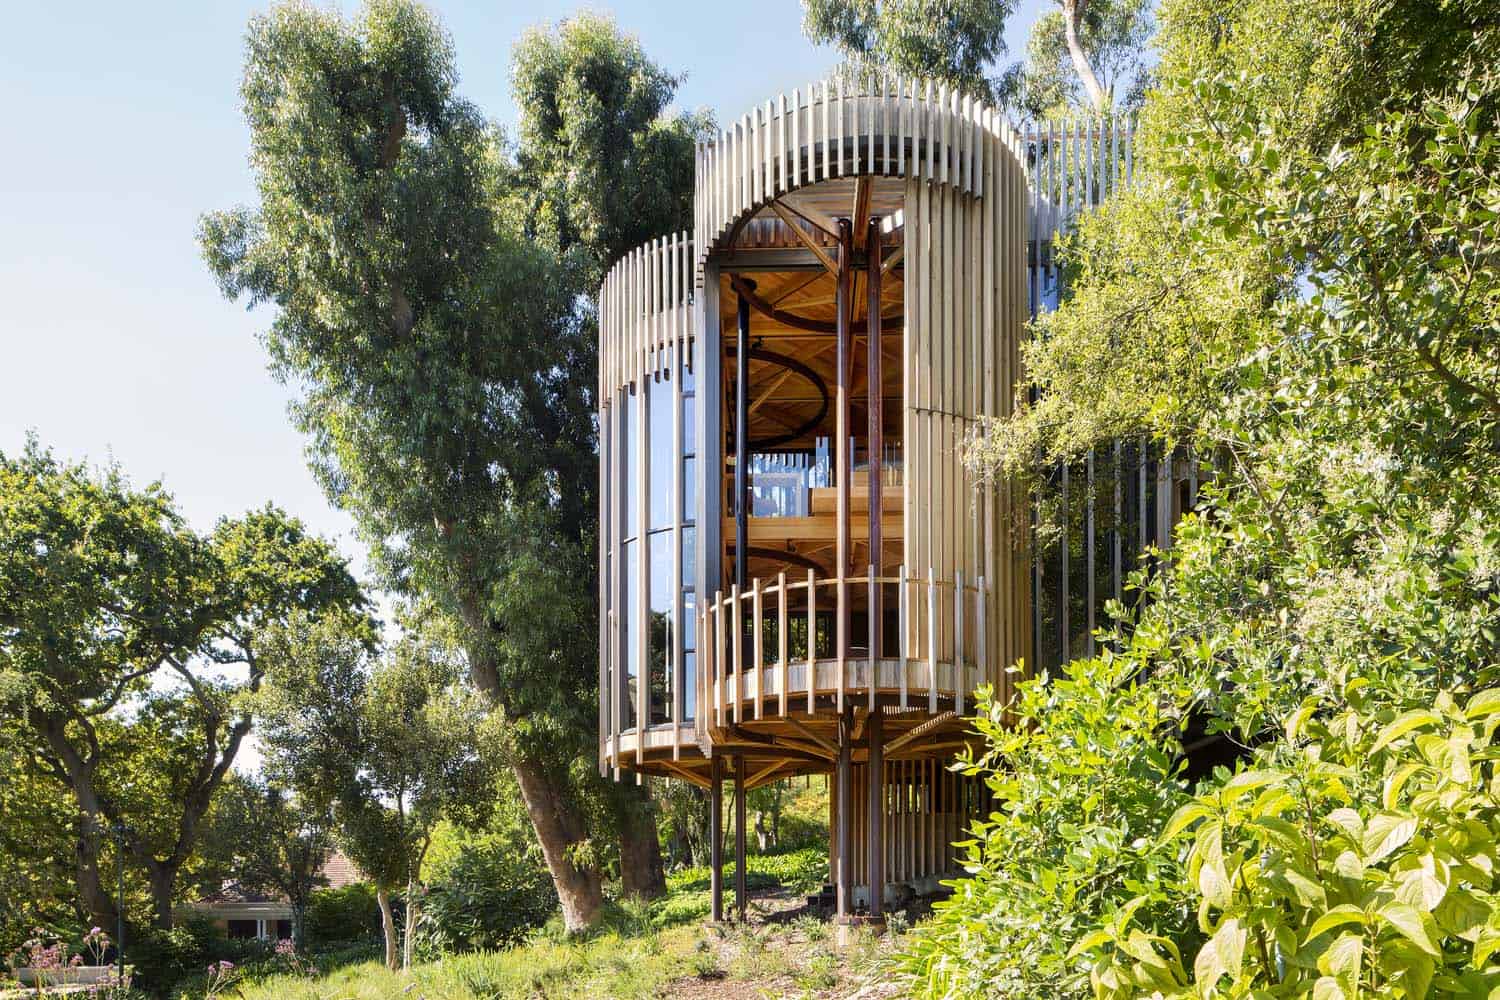 South African tree house hideaway surrounded by forest-like gardens